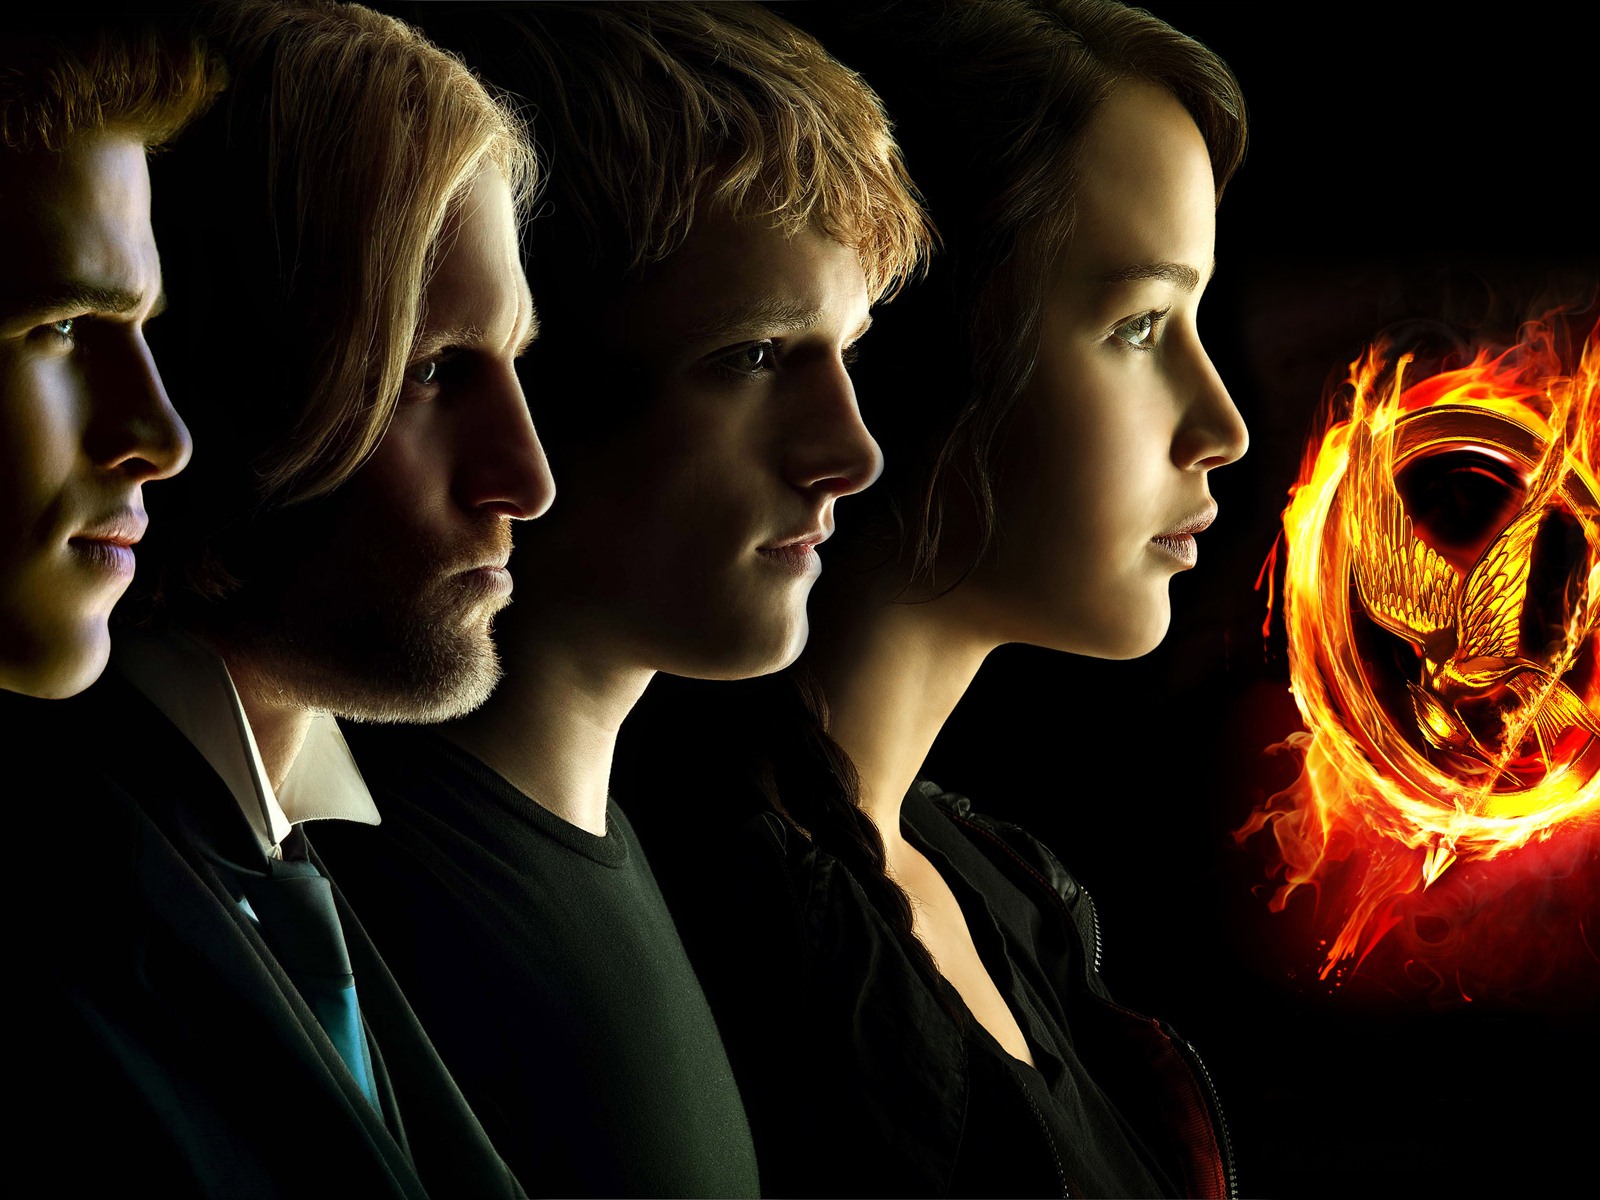 The Hunger Games HD wallpapers #9 - 1600x1200